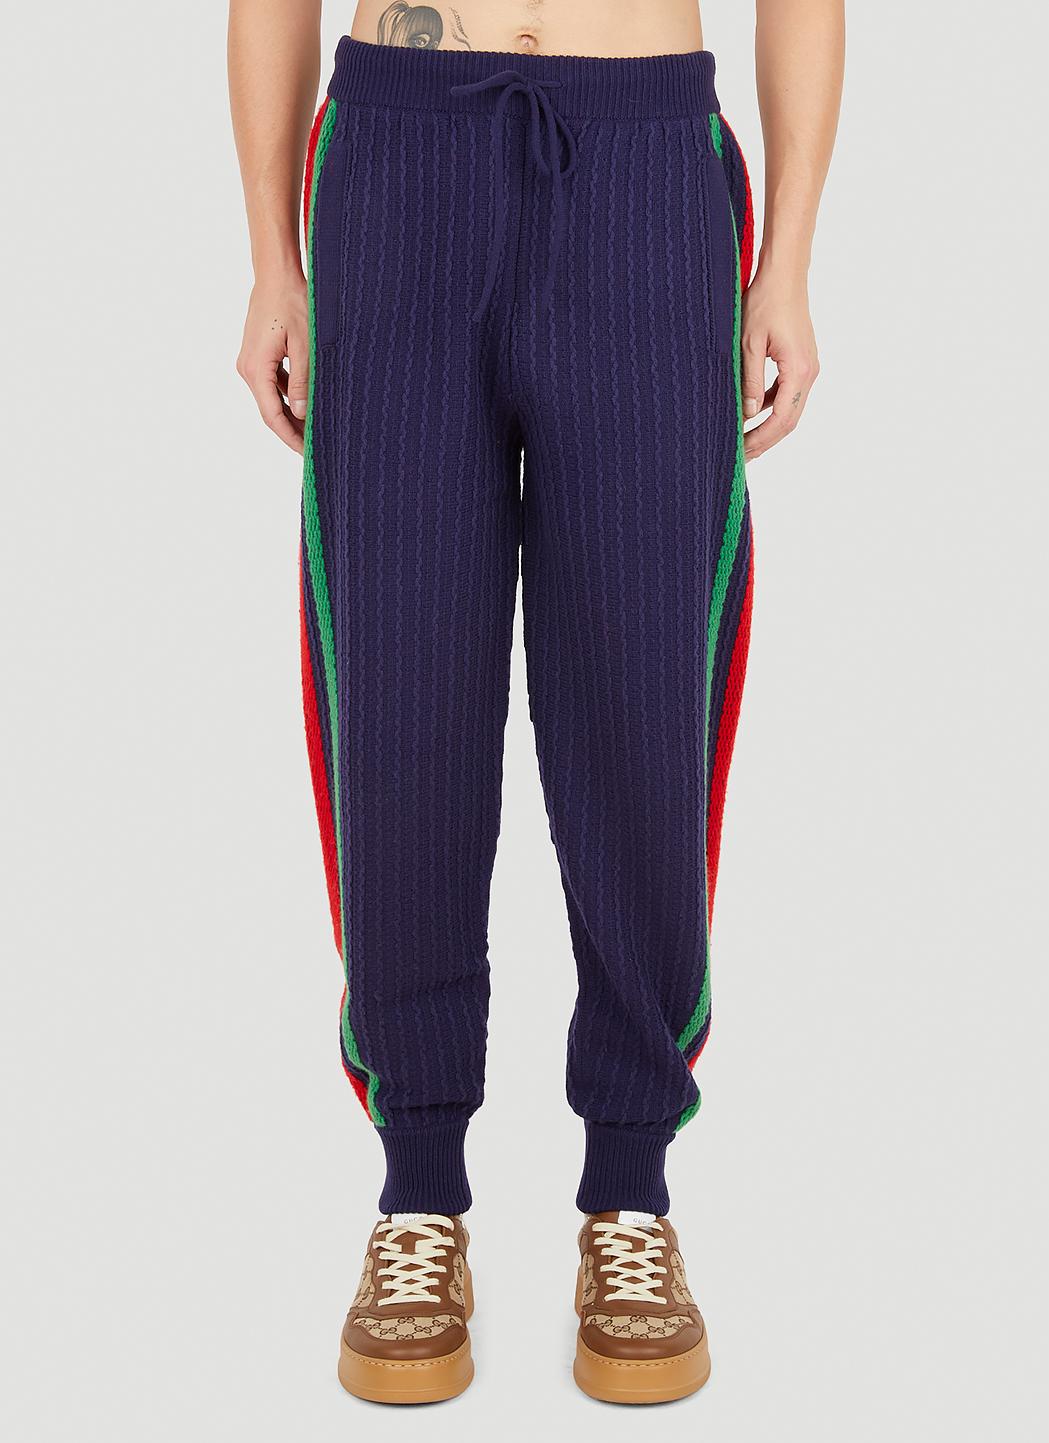 Gucci Gg Jersey Track Pants - Gold | Editorialist